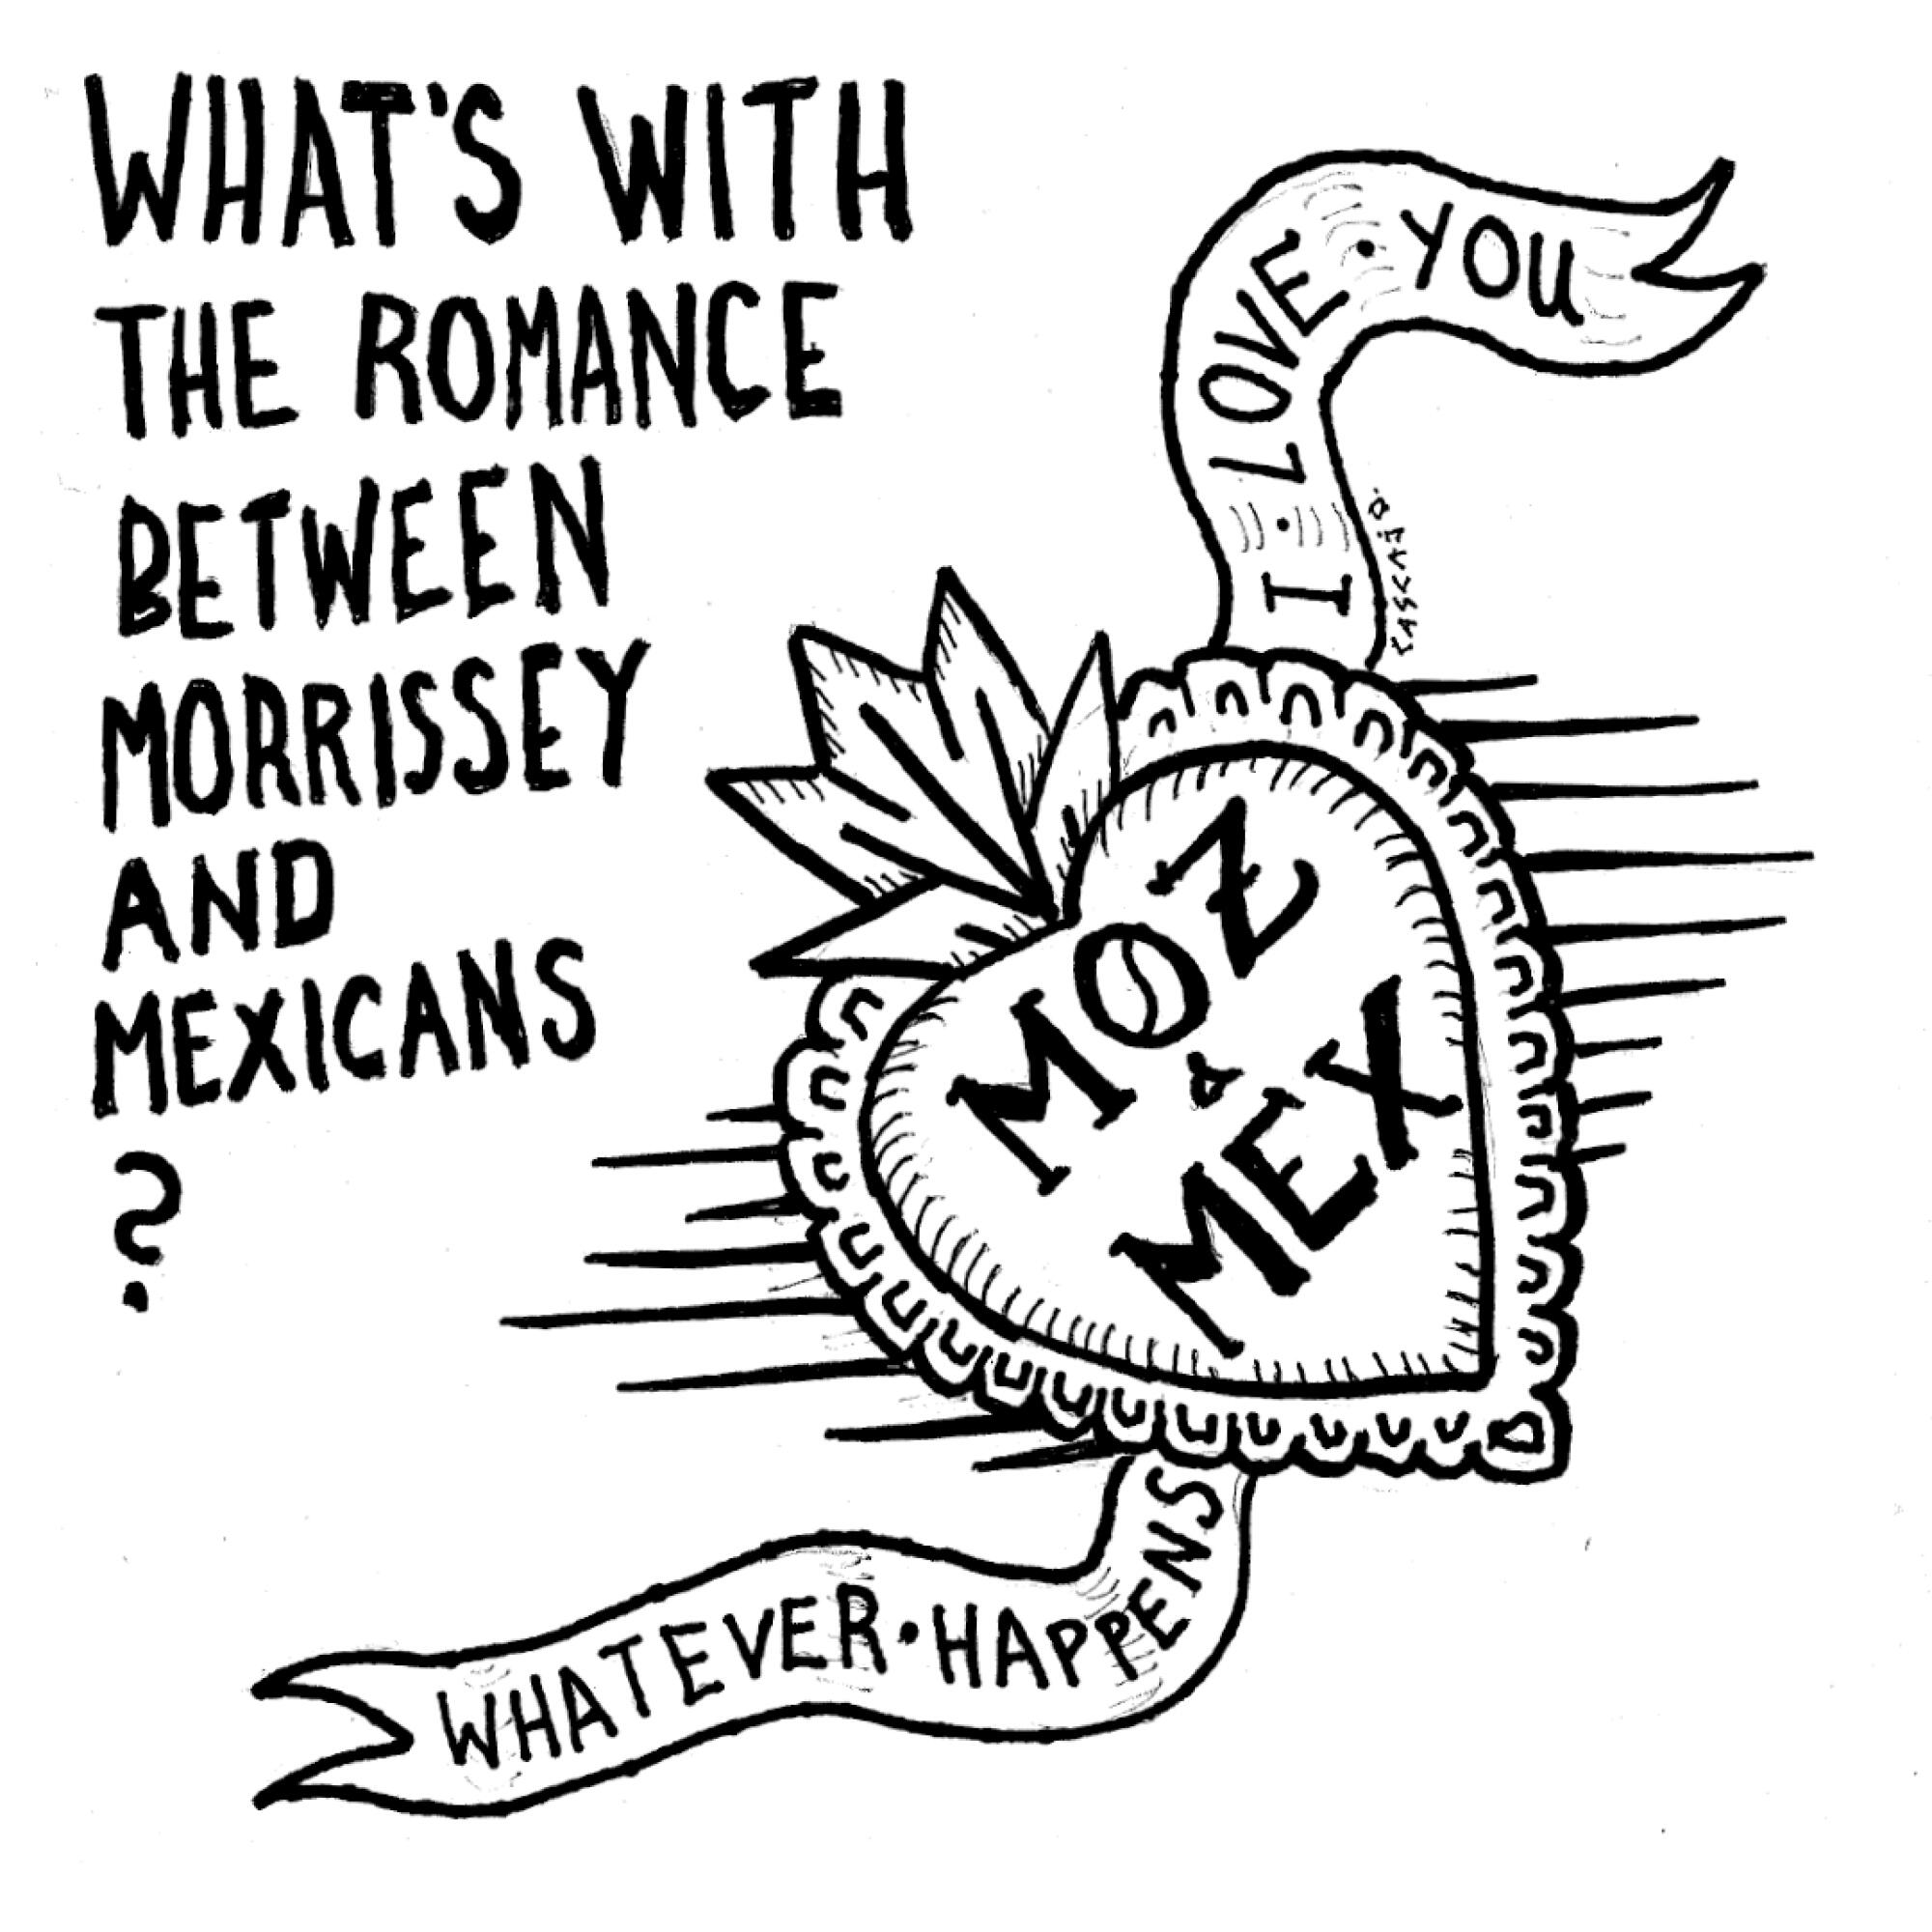 What's with the romance between Morrissey and Mexicans?